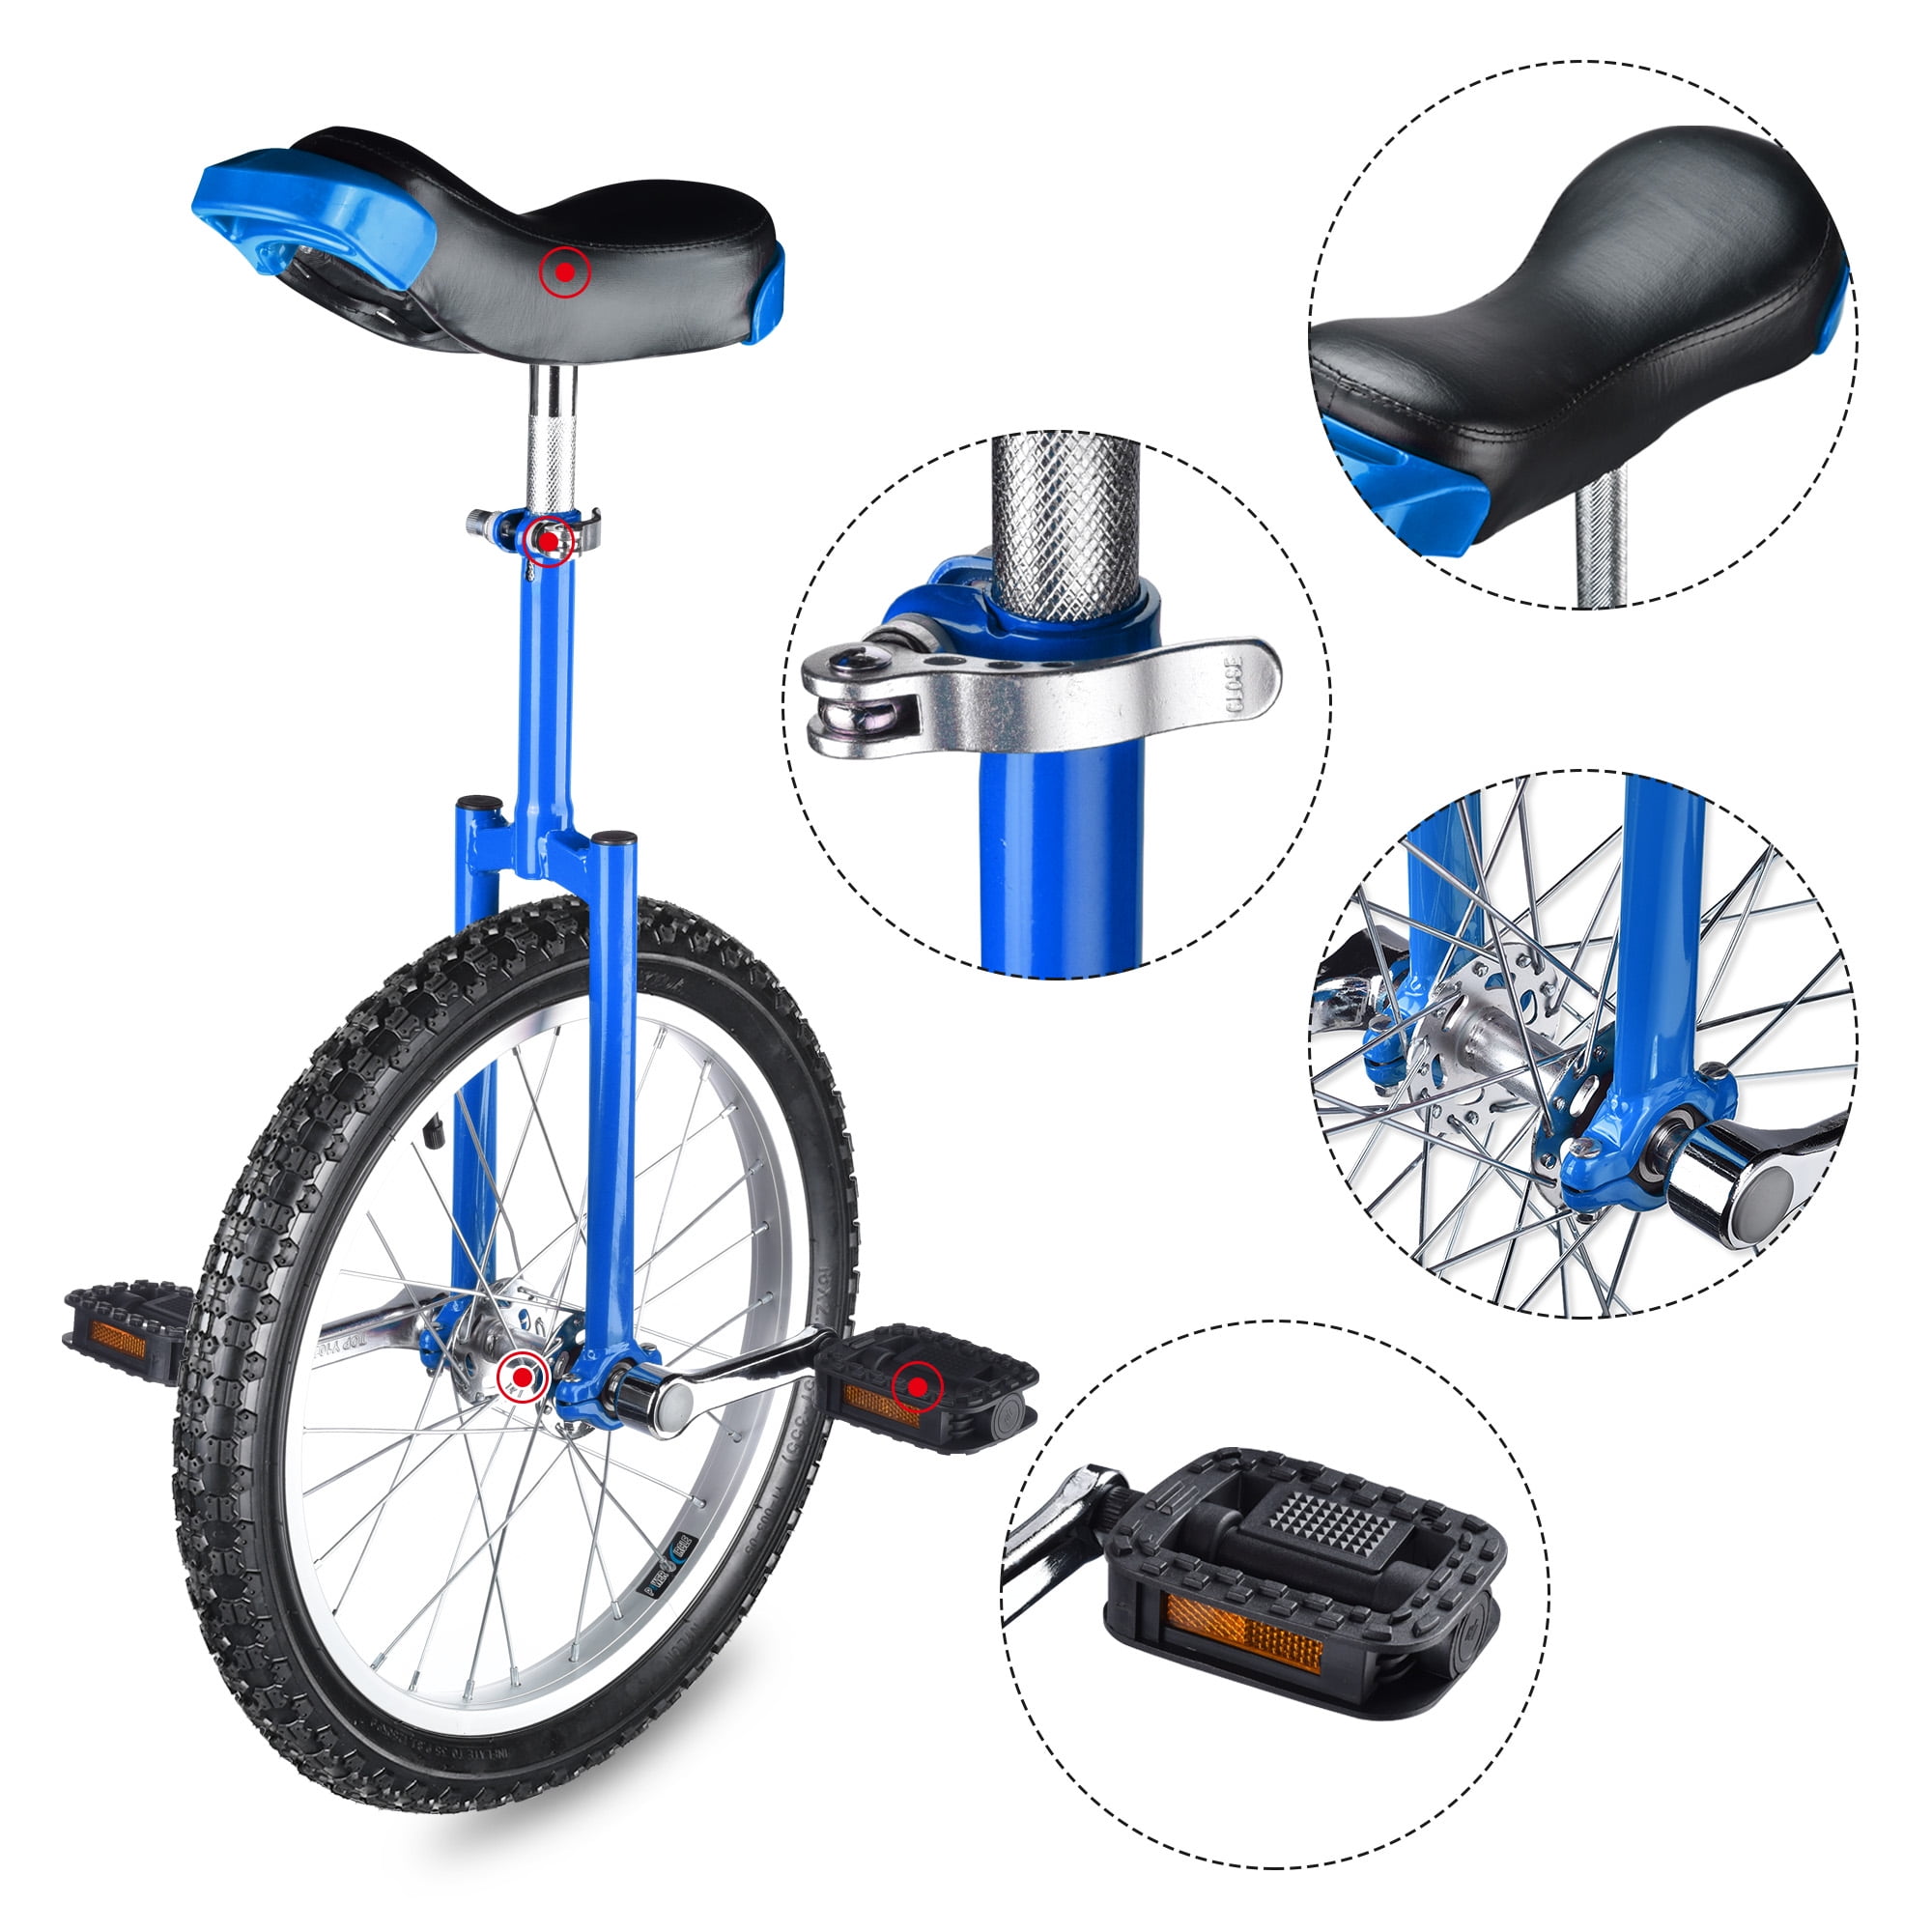 18" Silver Unicycle Cycling Scooter Circus Bike Skidproof Tire Balance Exercise 